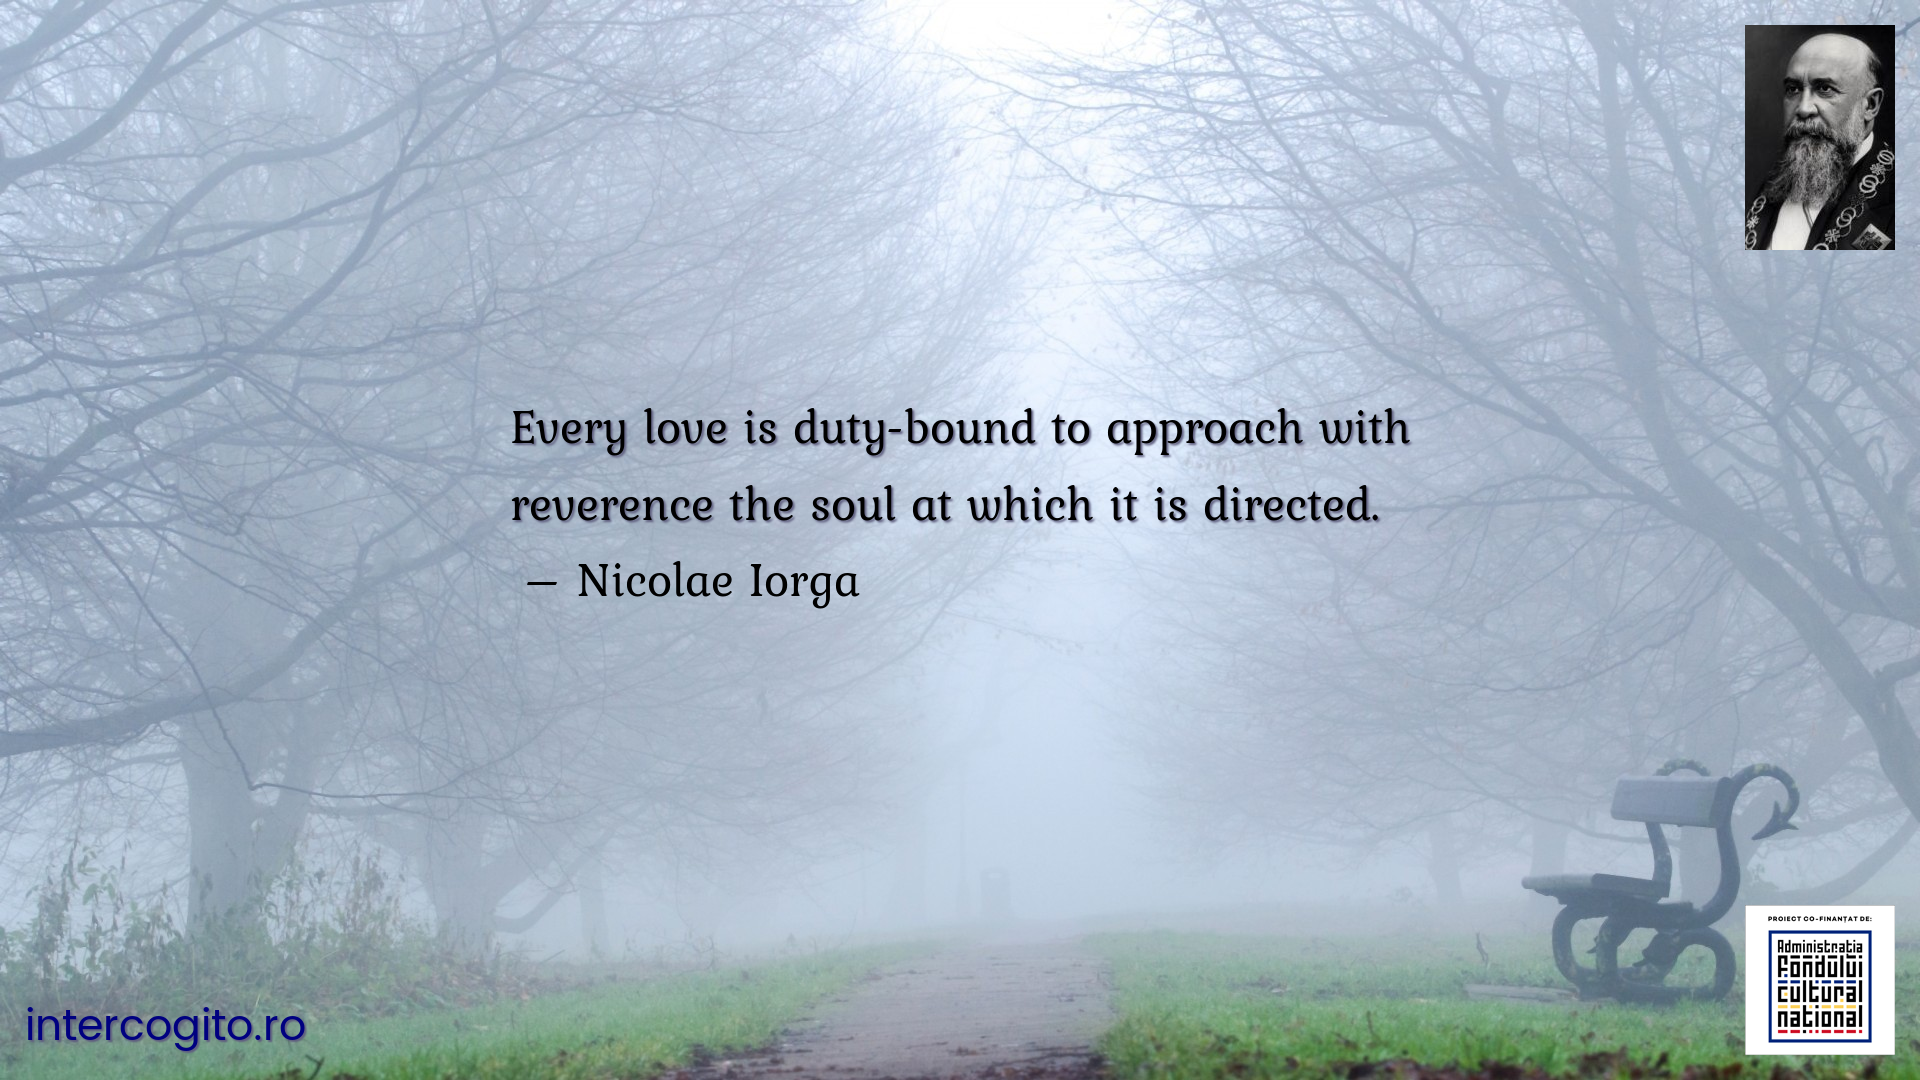 Every love is duty-bound to approach with reverence the soul at which it is directed.